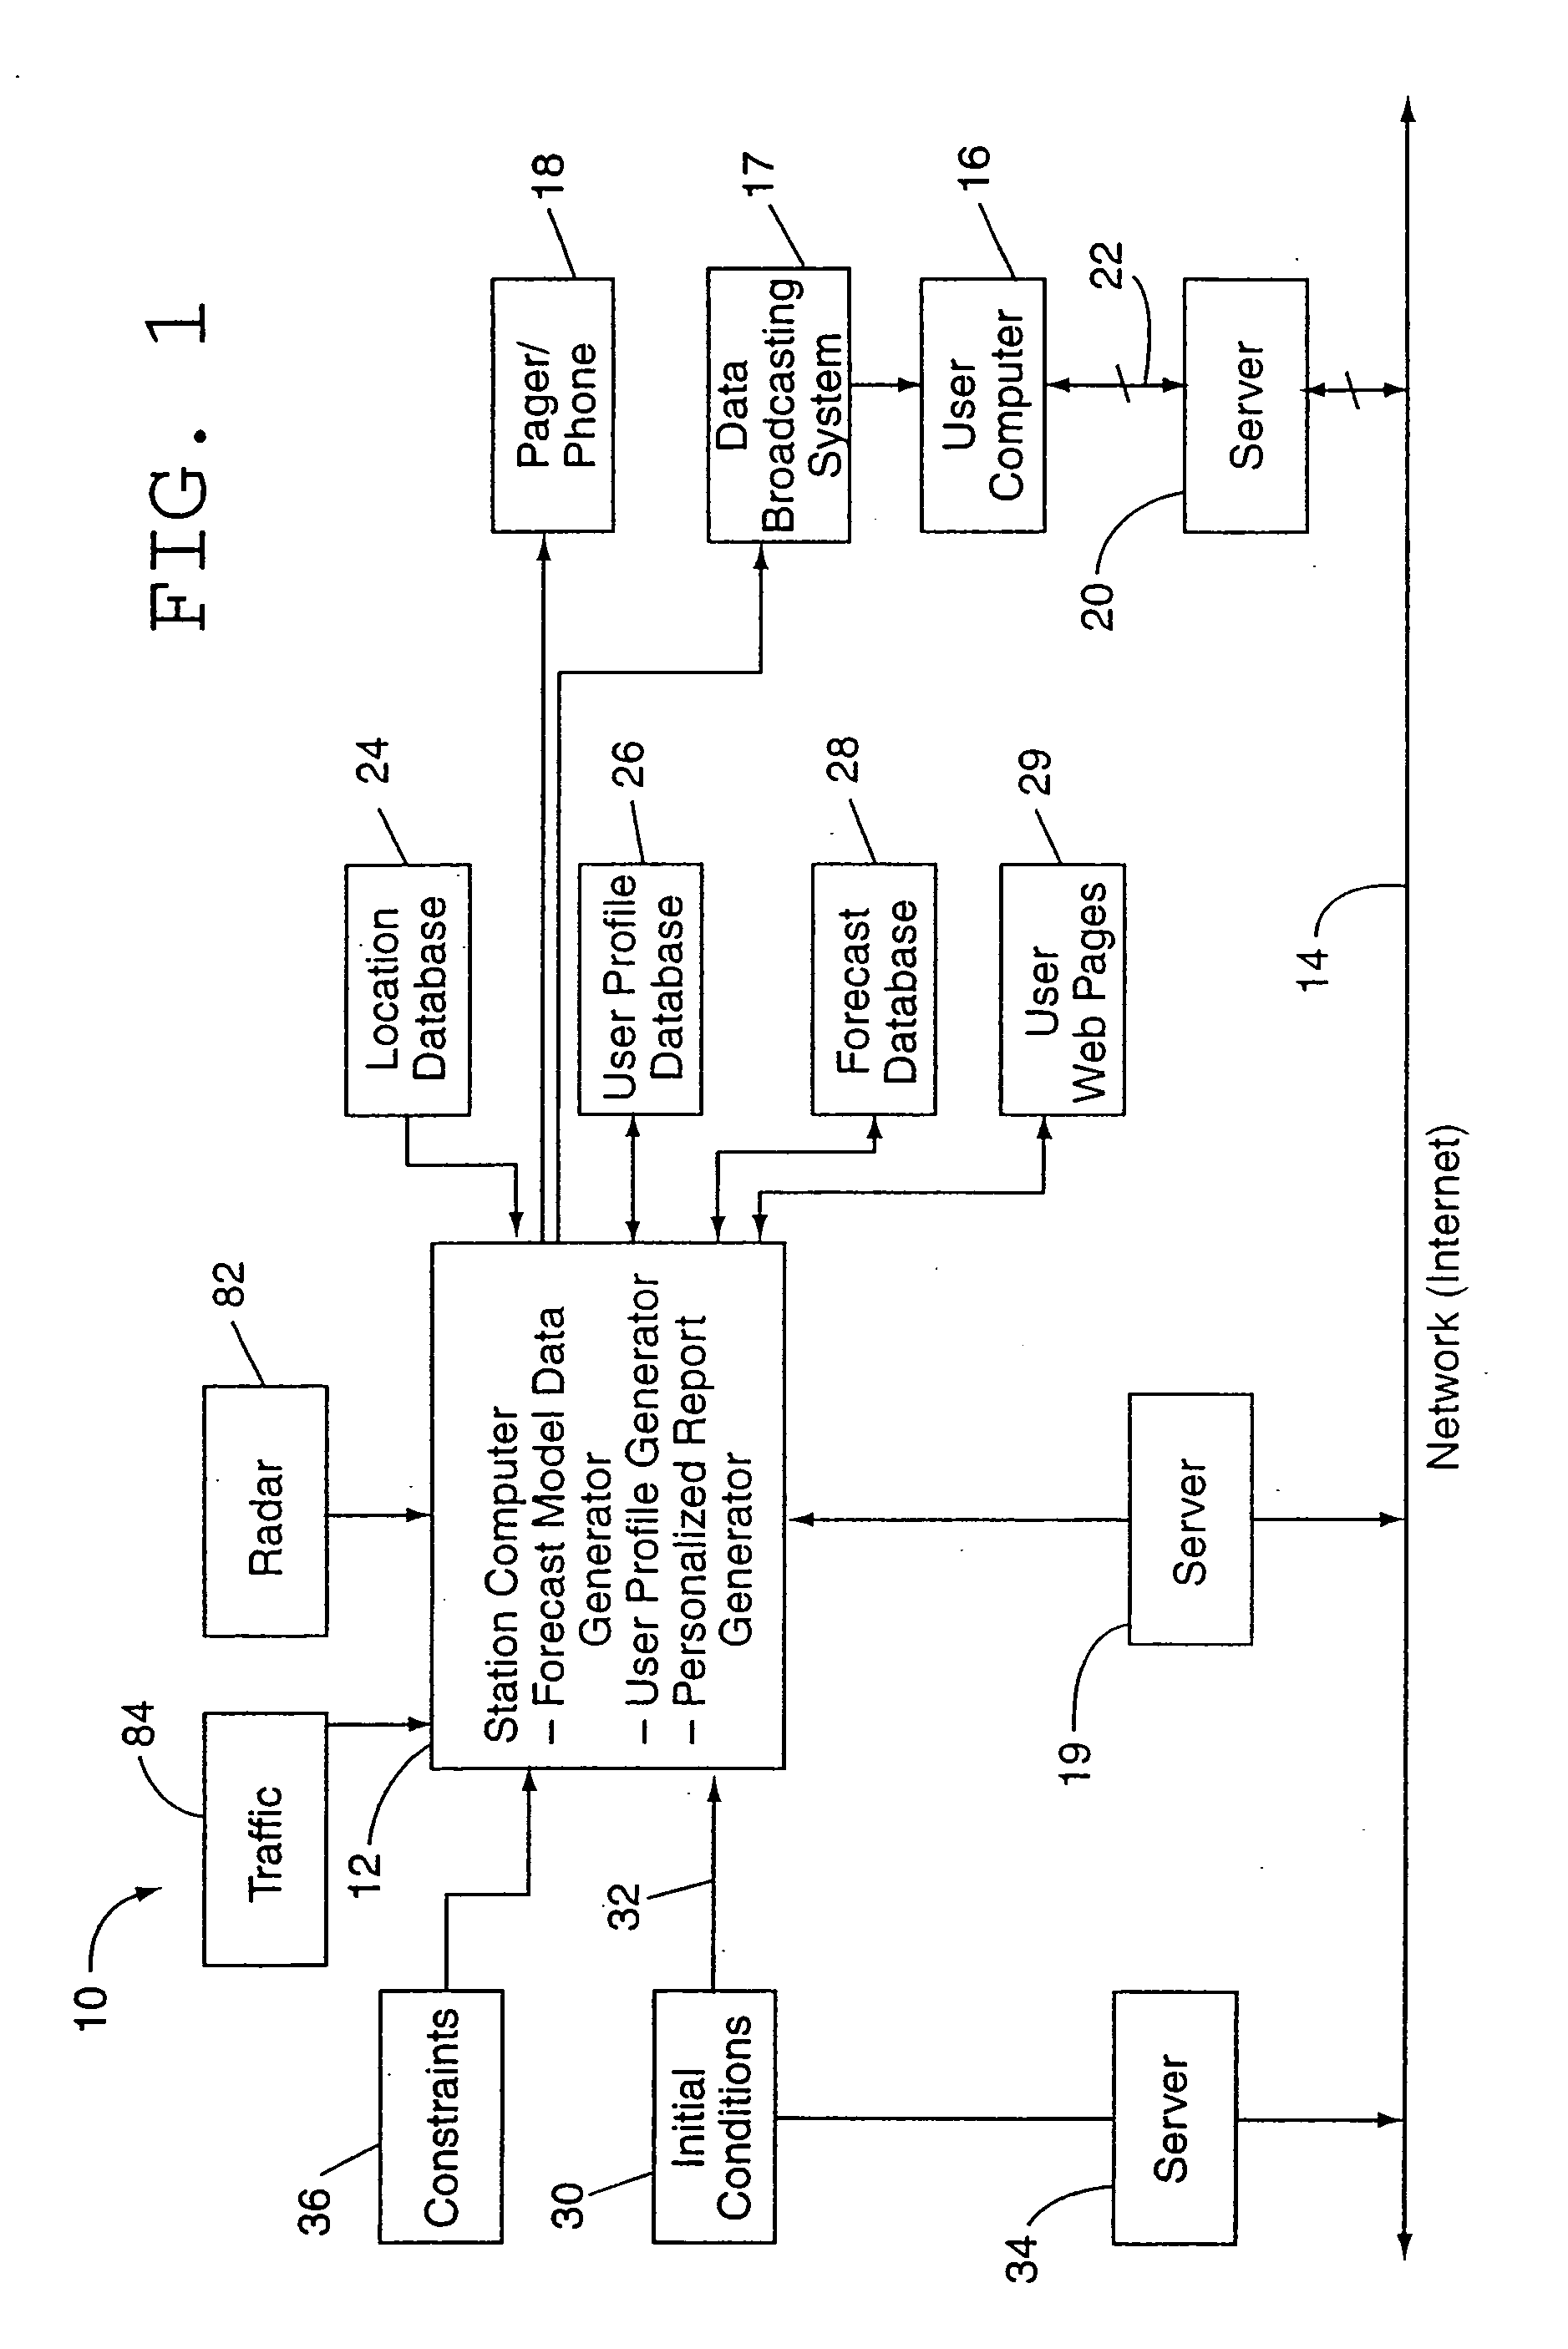 System and method for providing personalized weather reports and the like